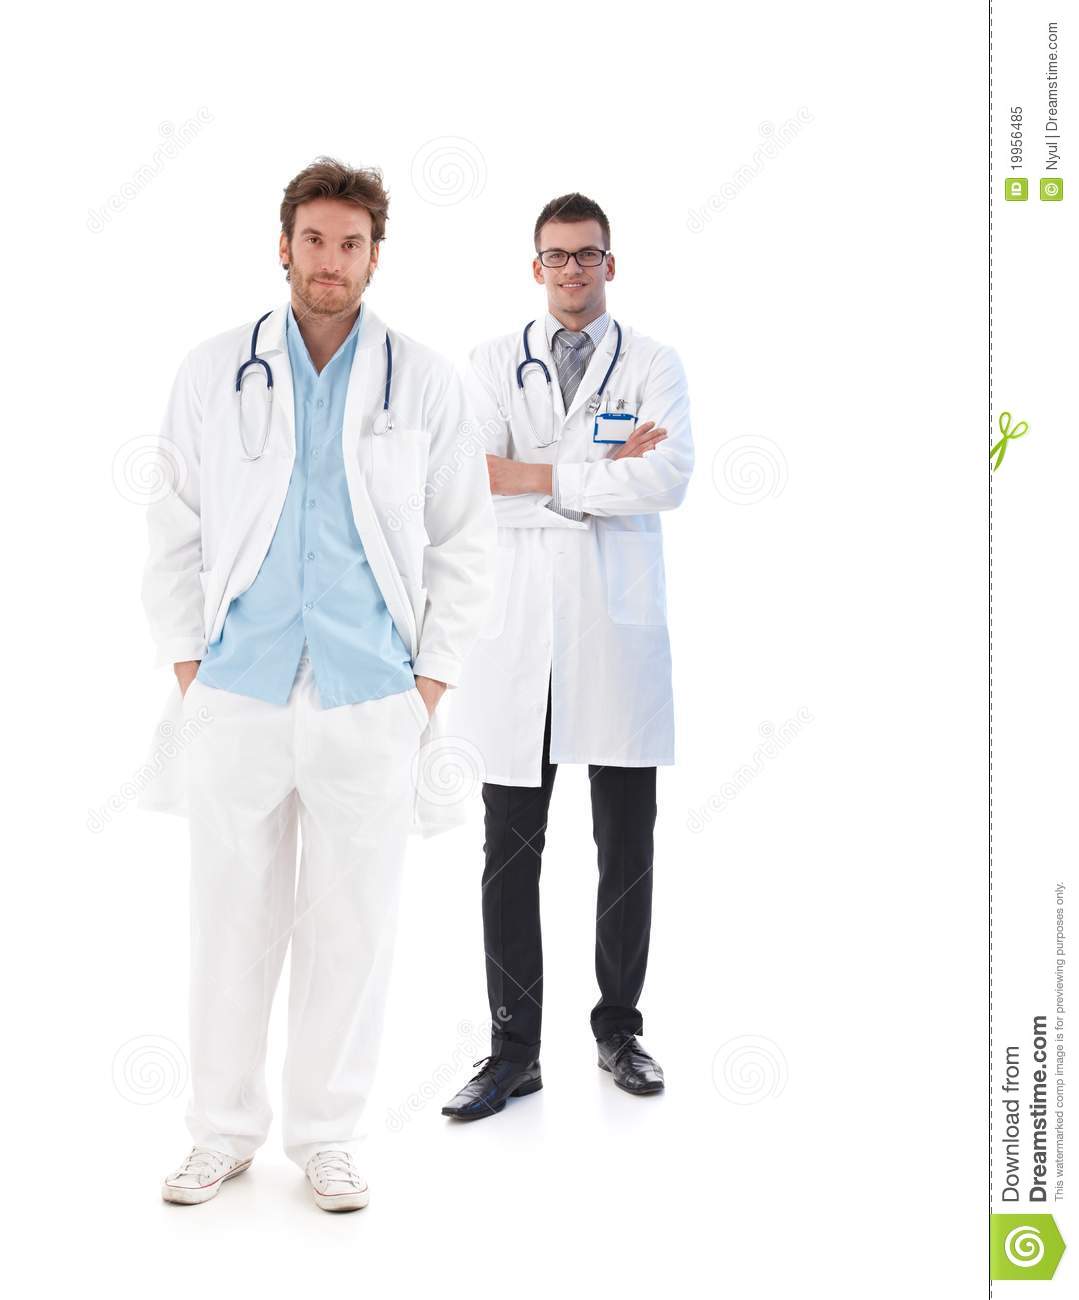 Full Length Portrait Of Young Male Doctors Royalty Free Stock Photo    